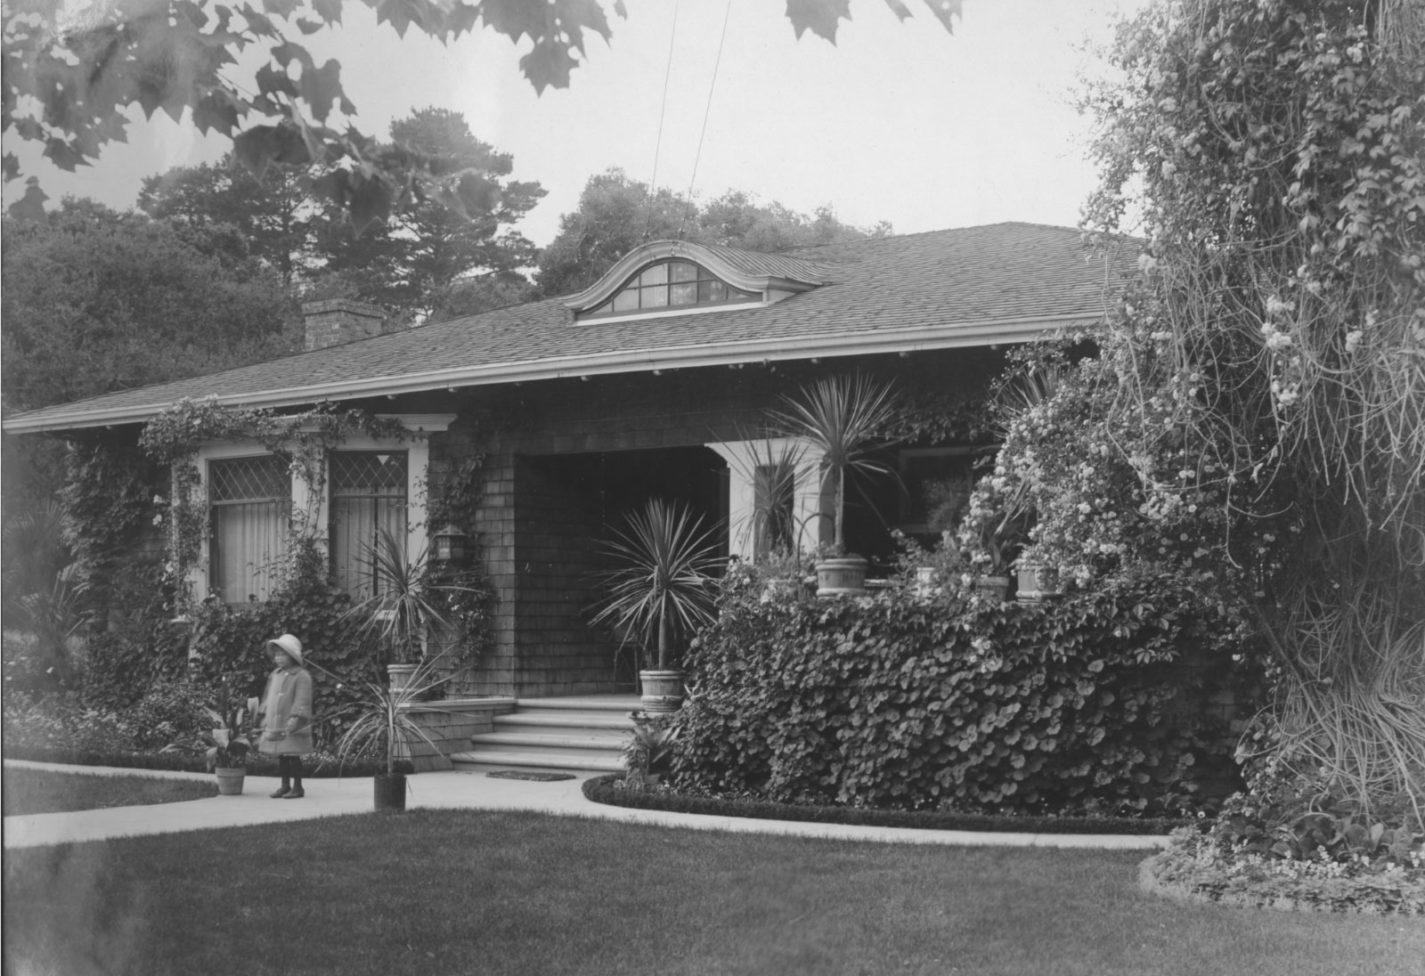 1915 photo of a bungalow on Ninth Avenue in San Mateo